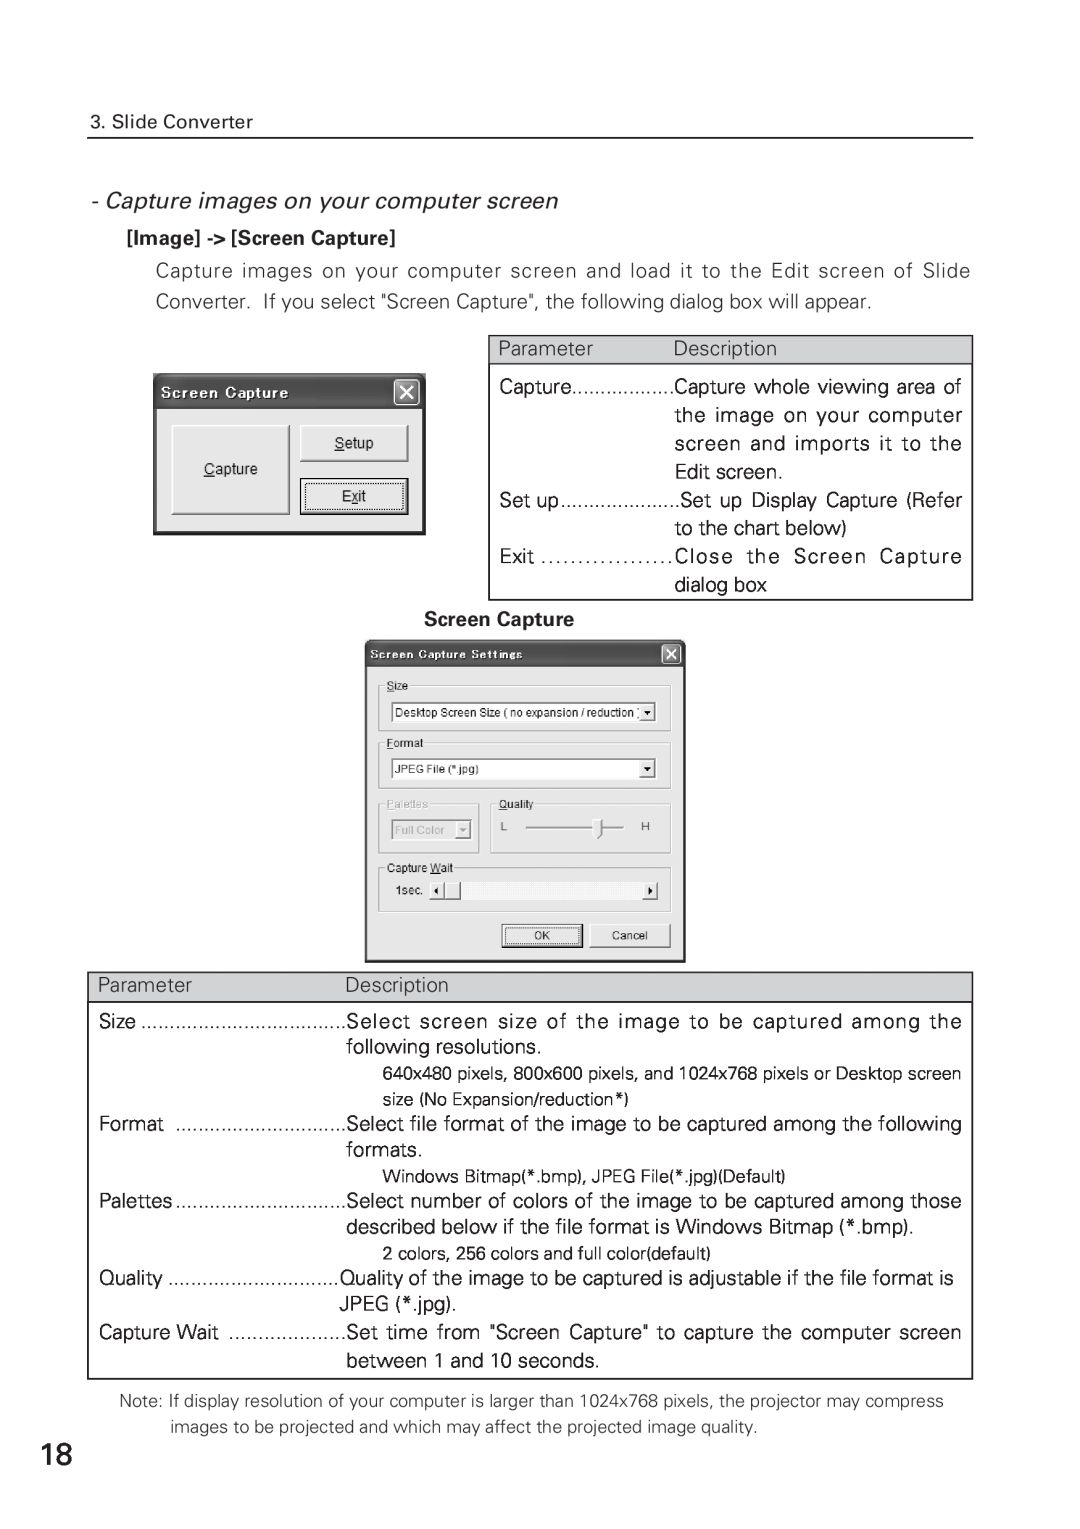 Eiki WL-10 owner manual Capture images on your computer screen, Image - Screen Capture 